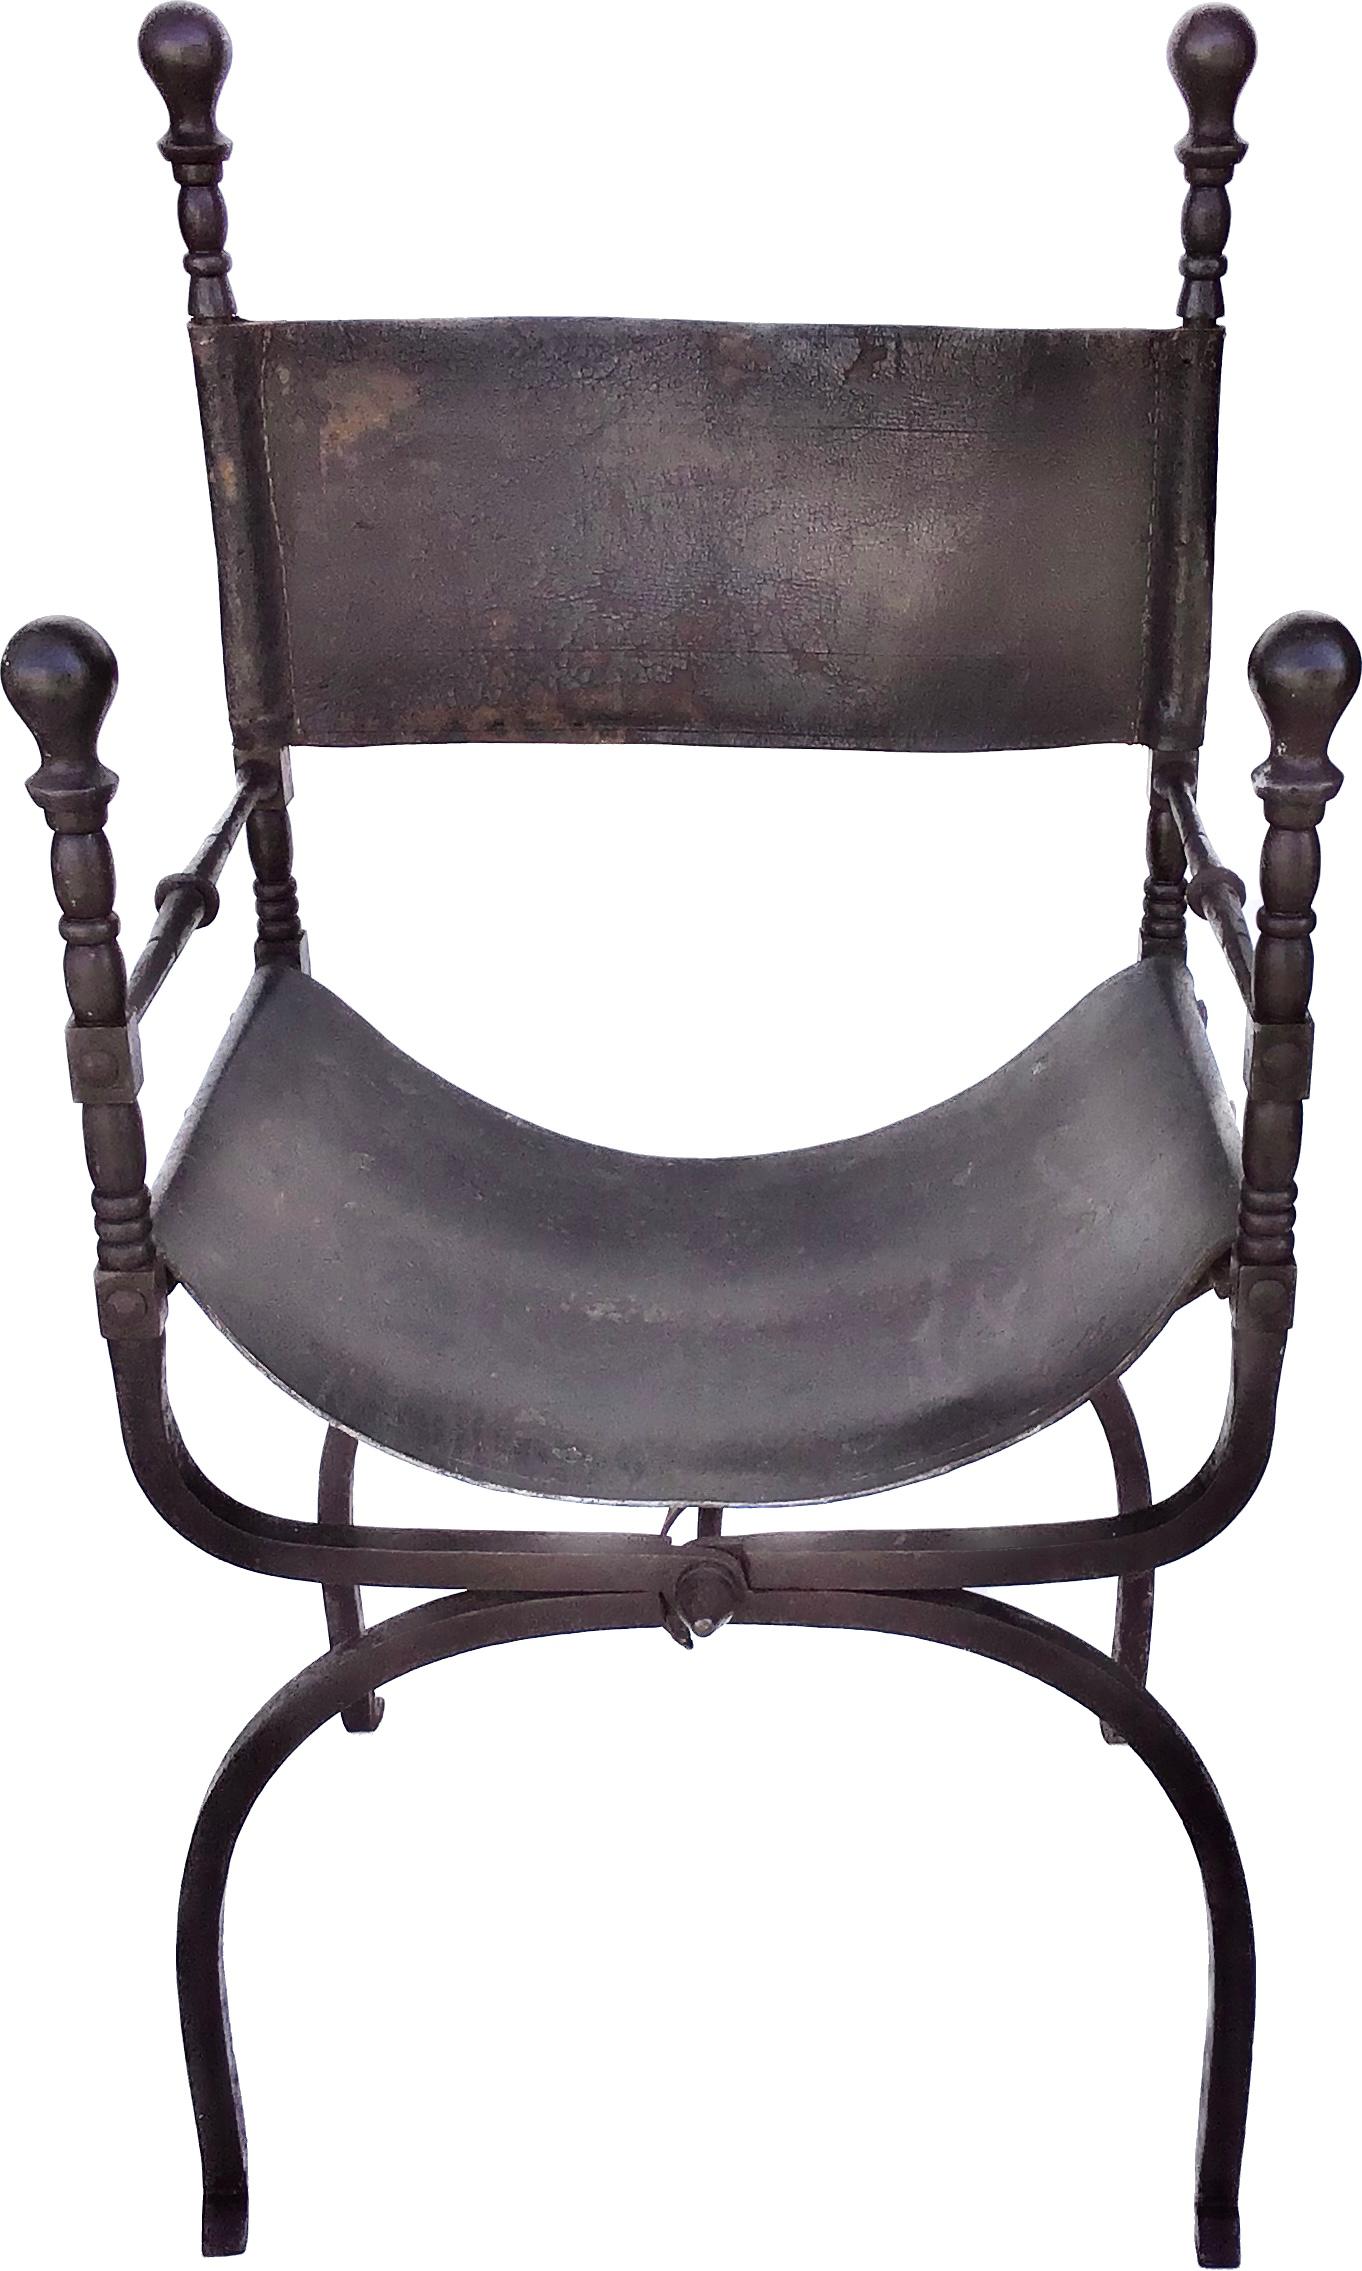 Stunning Italian iron Savonarola Dante chair also known as Curule chairs. Featuring a scissor form iron frame that folds in a Campaign style with iron finials and feet. The seat and back are upholstered with thick distressed leather hides with a